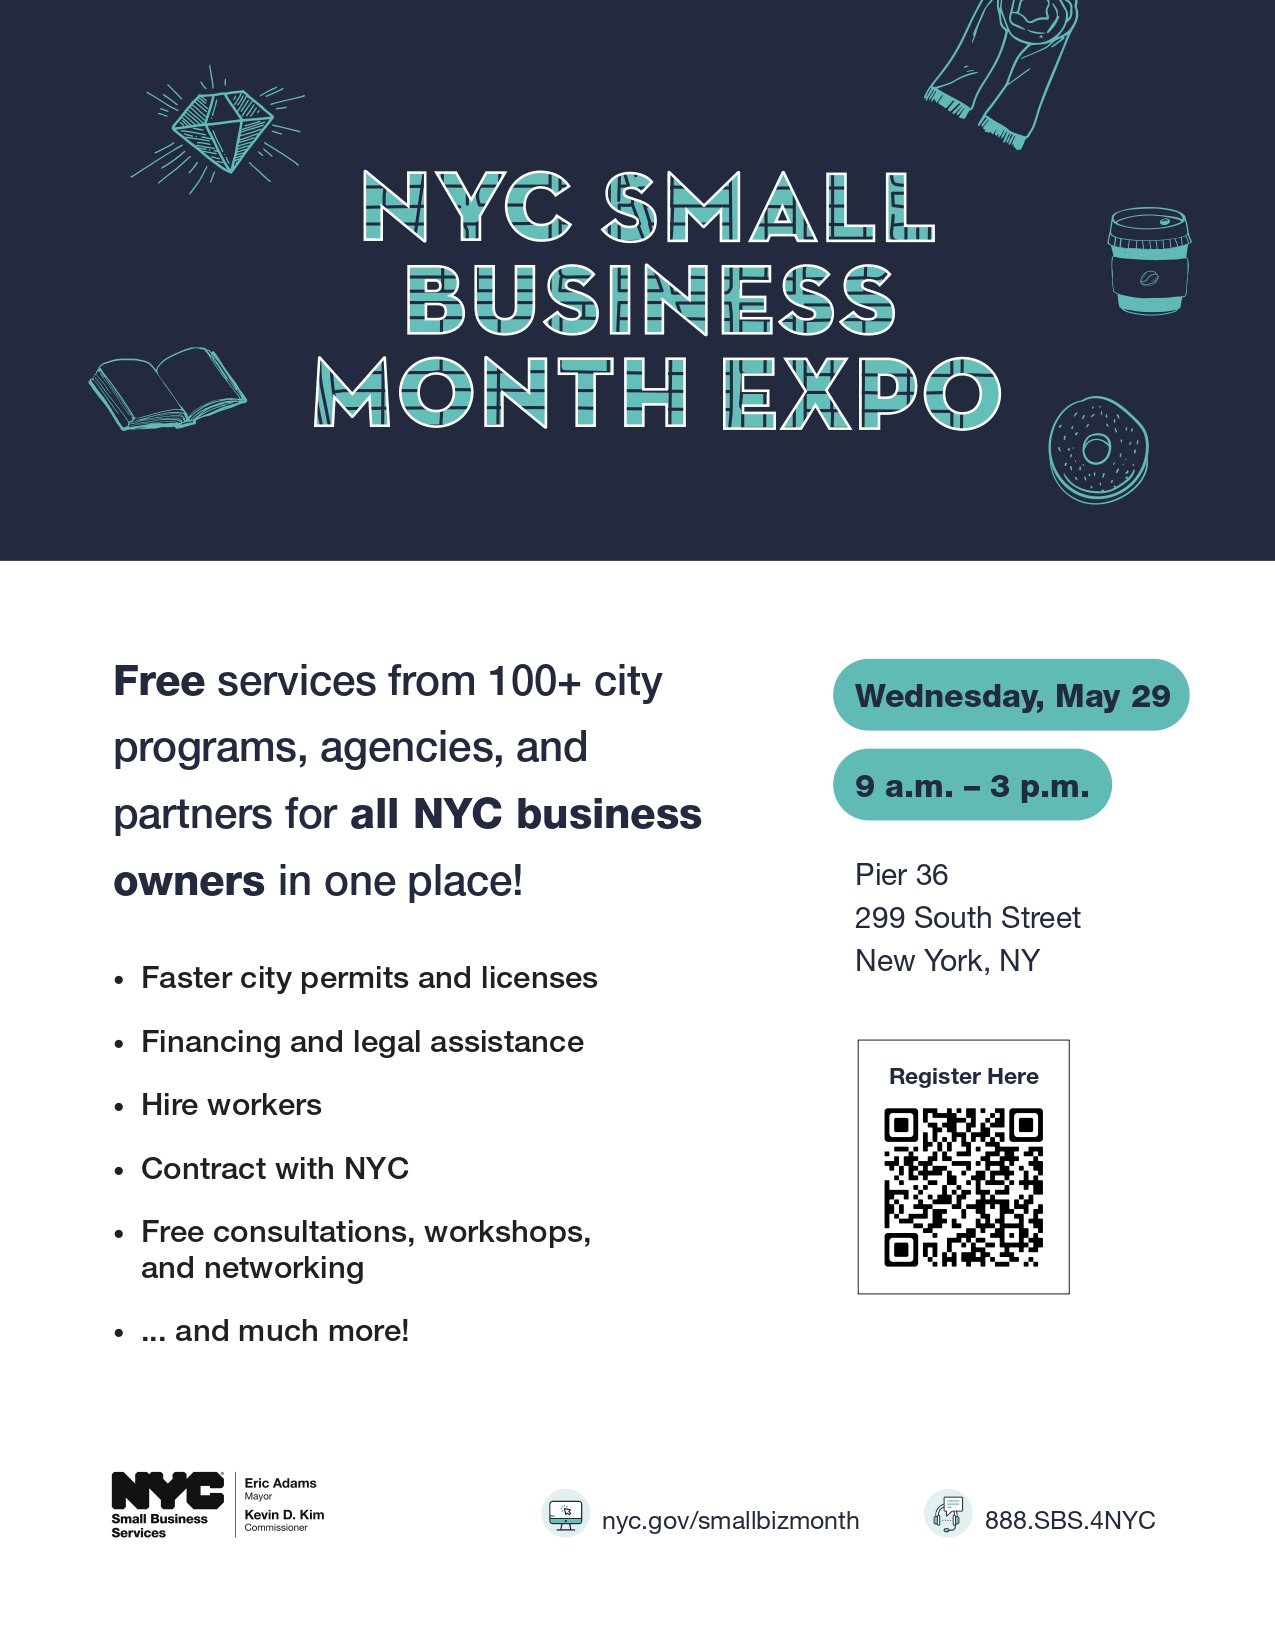 NYC Small Business Month Expo_flyer-English.jpg